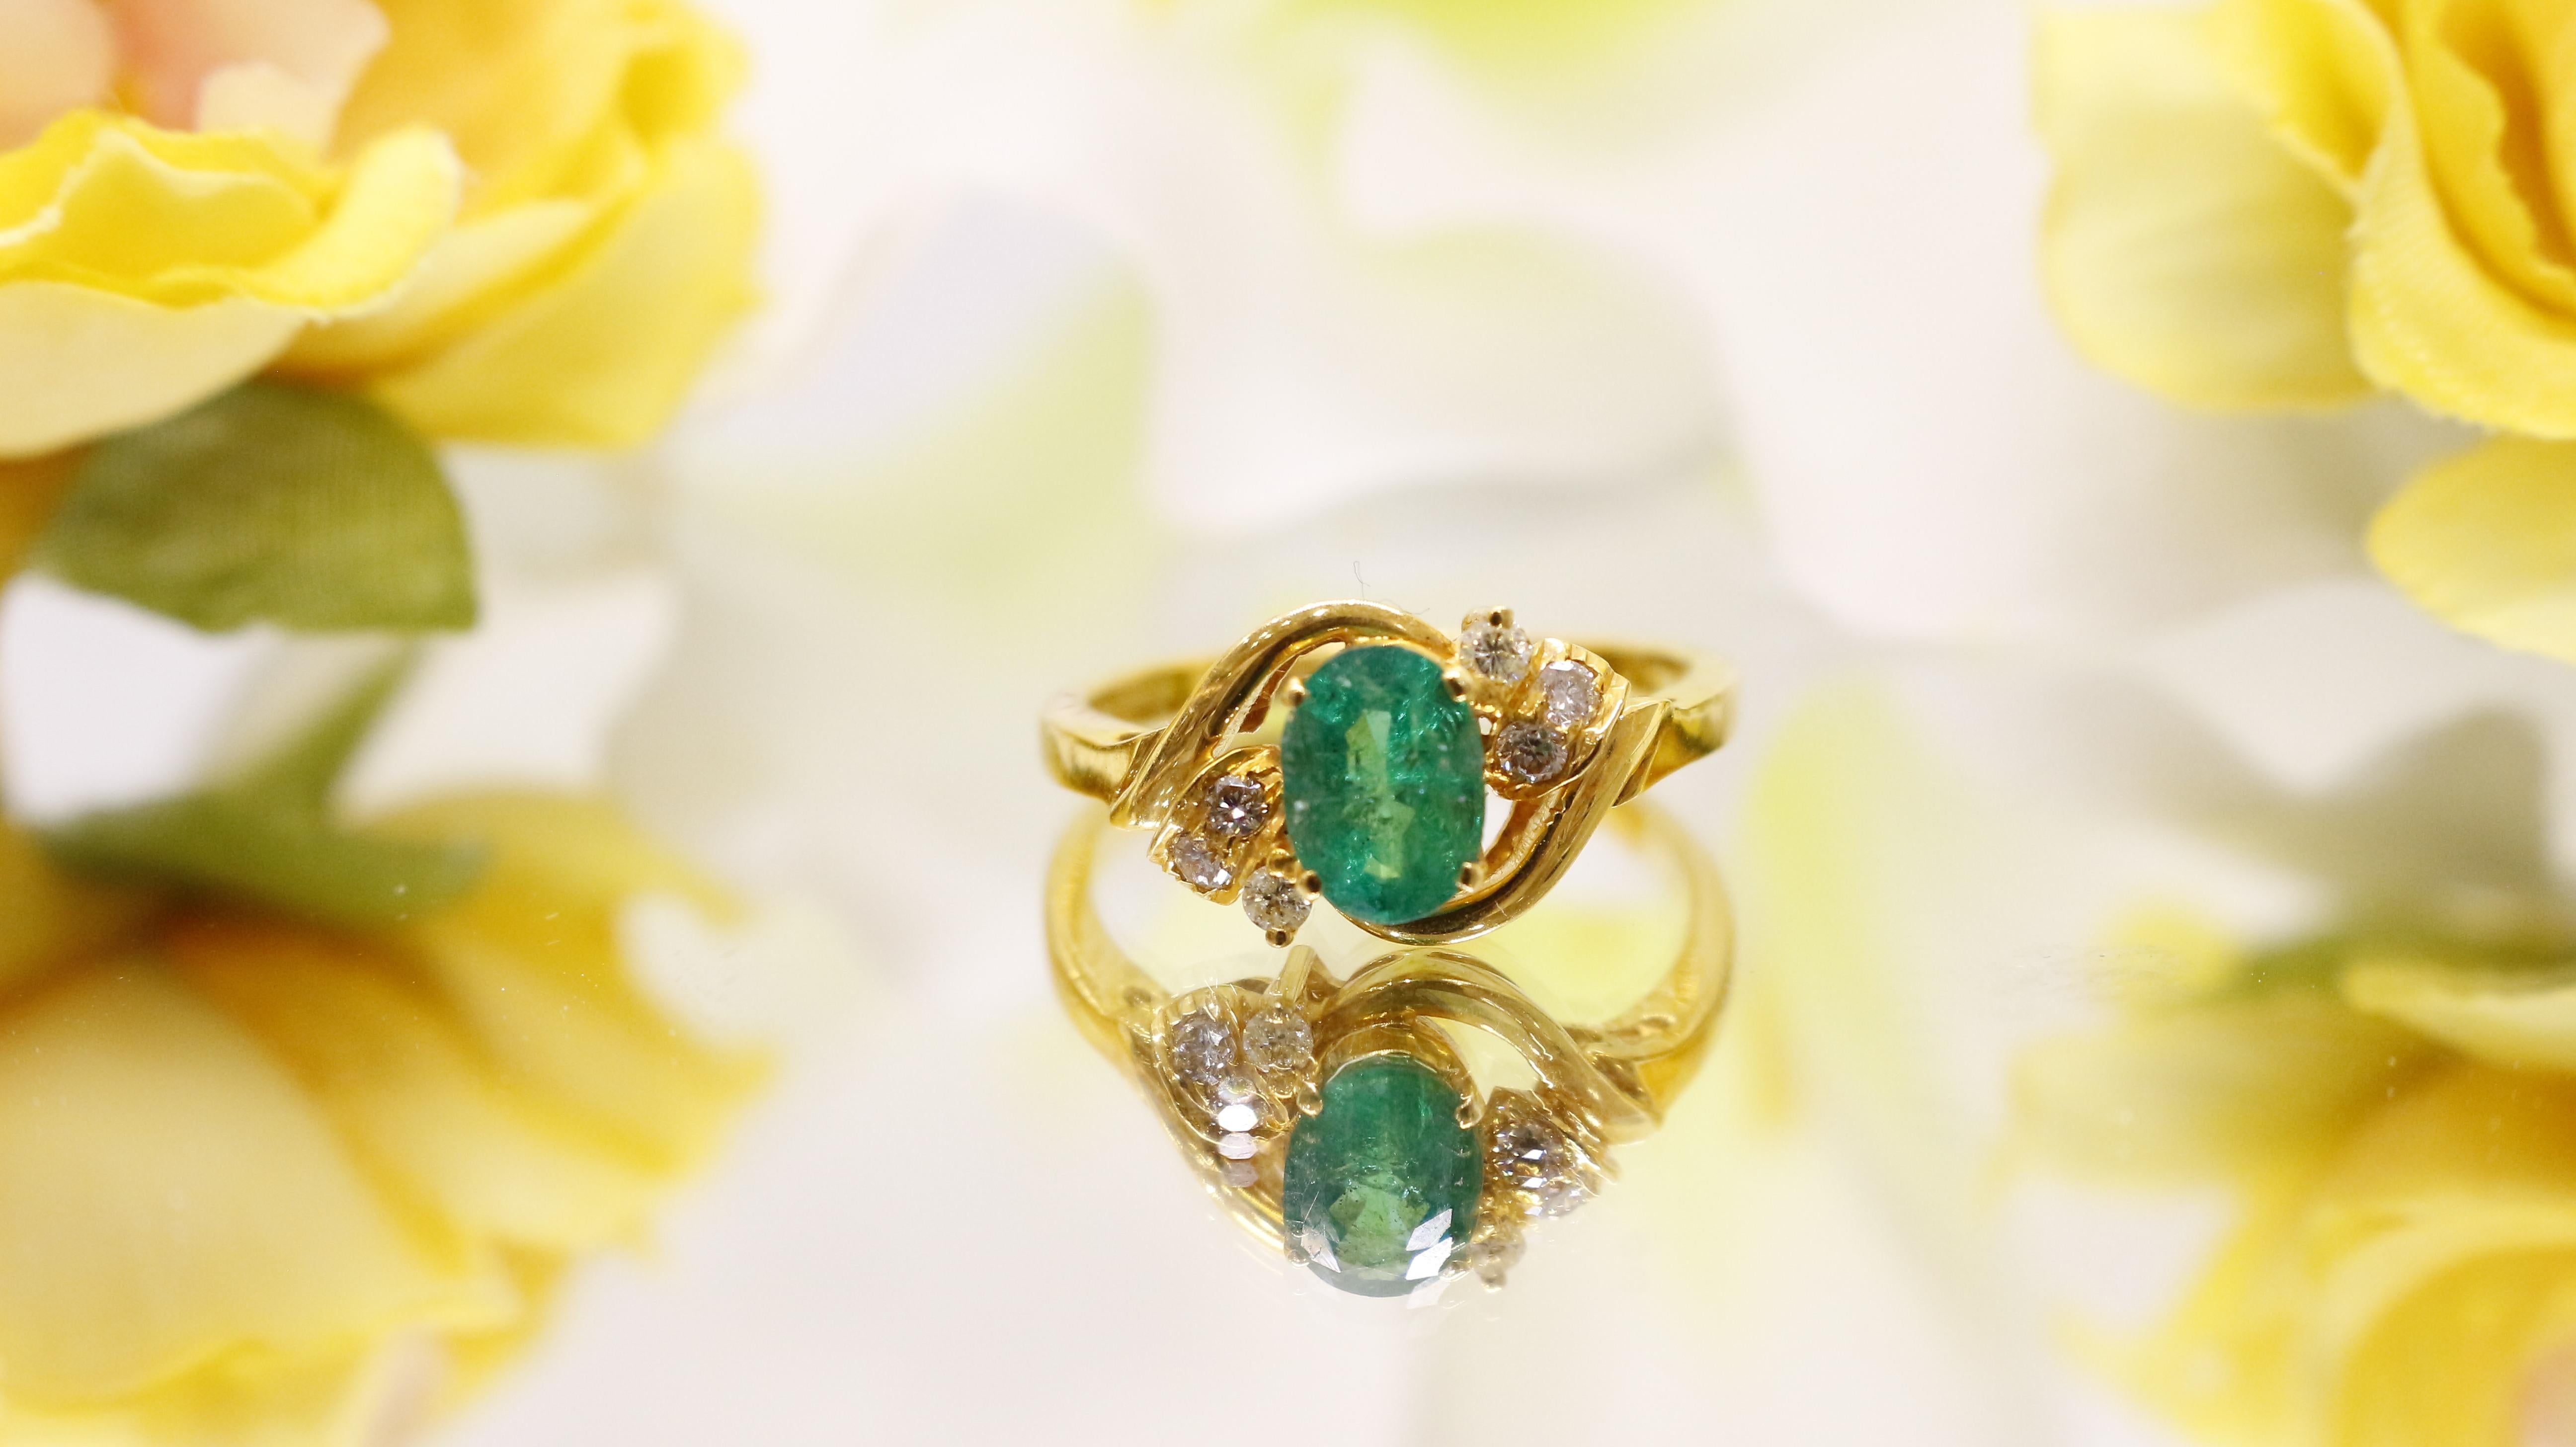 Brilliant 1.5CT Natural Emerald Center Engagement Ring, Minimalist Style Anniversary Ring, Promise Ring For Female,18K Yellow, designer Gold Ring

◆Detail description◆

◆Solid 18kt Gold (shown in picture)

◆Stone Weight: 1.5 CT

◆Diamond Carat: 0.12